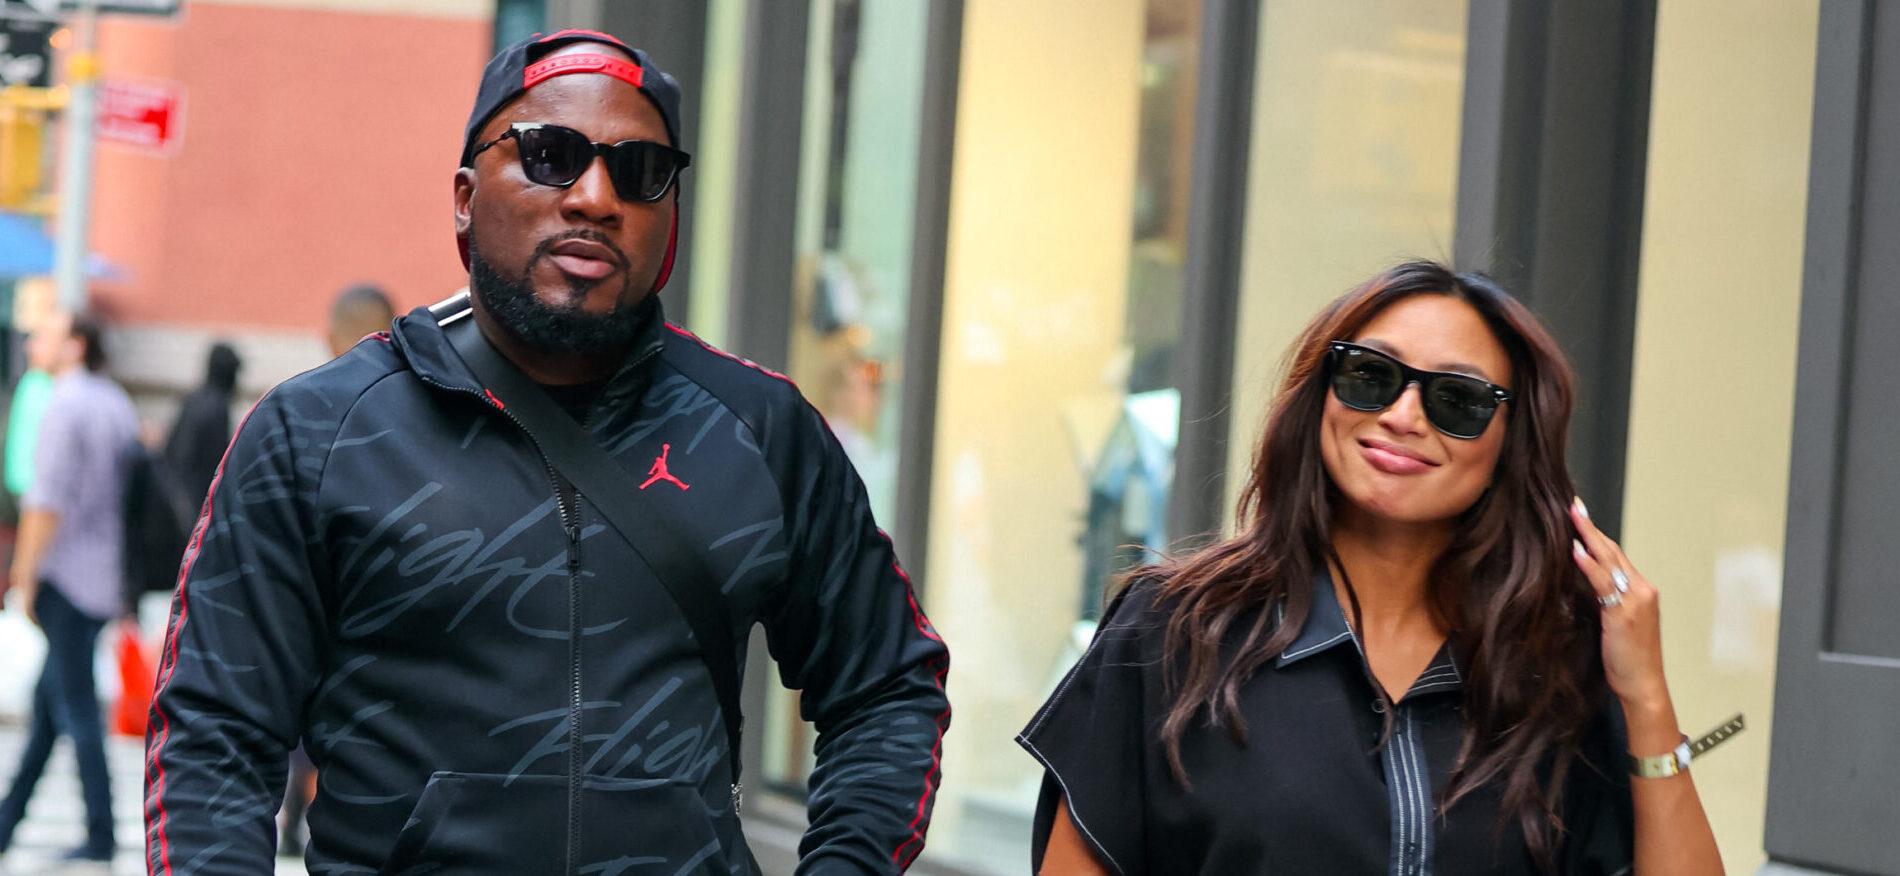 Jeannie Mai and Jeezy running errands in Downtown